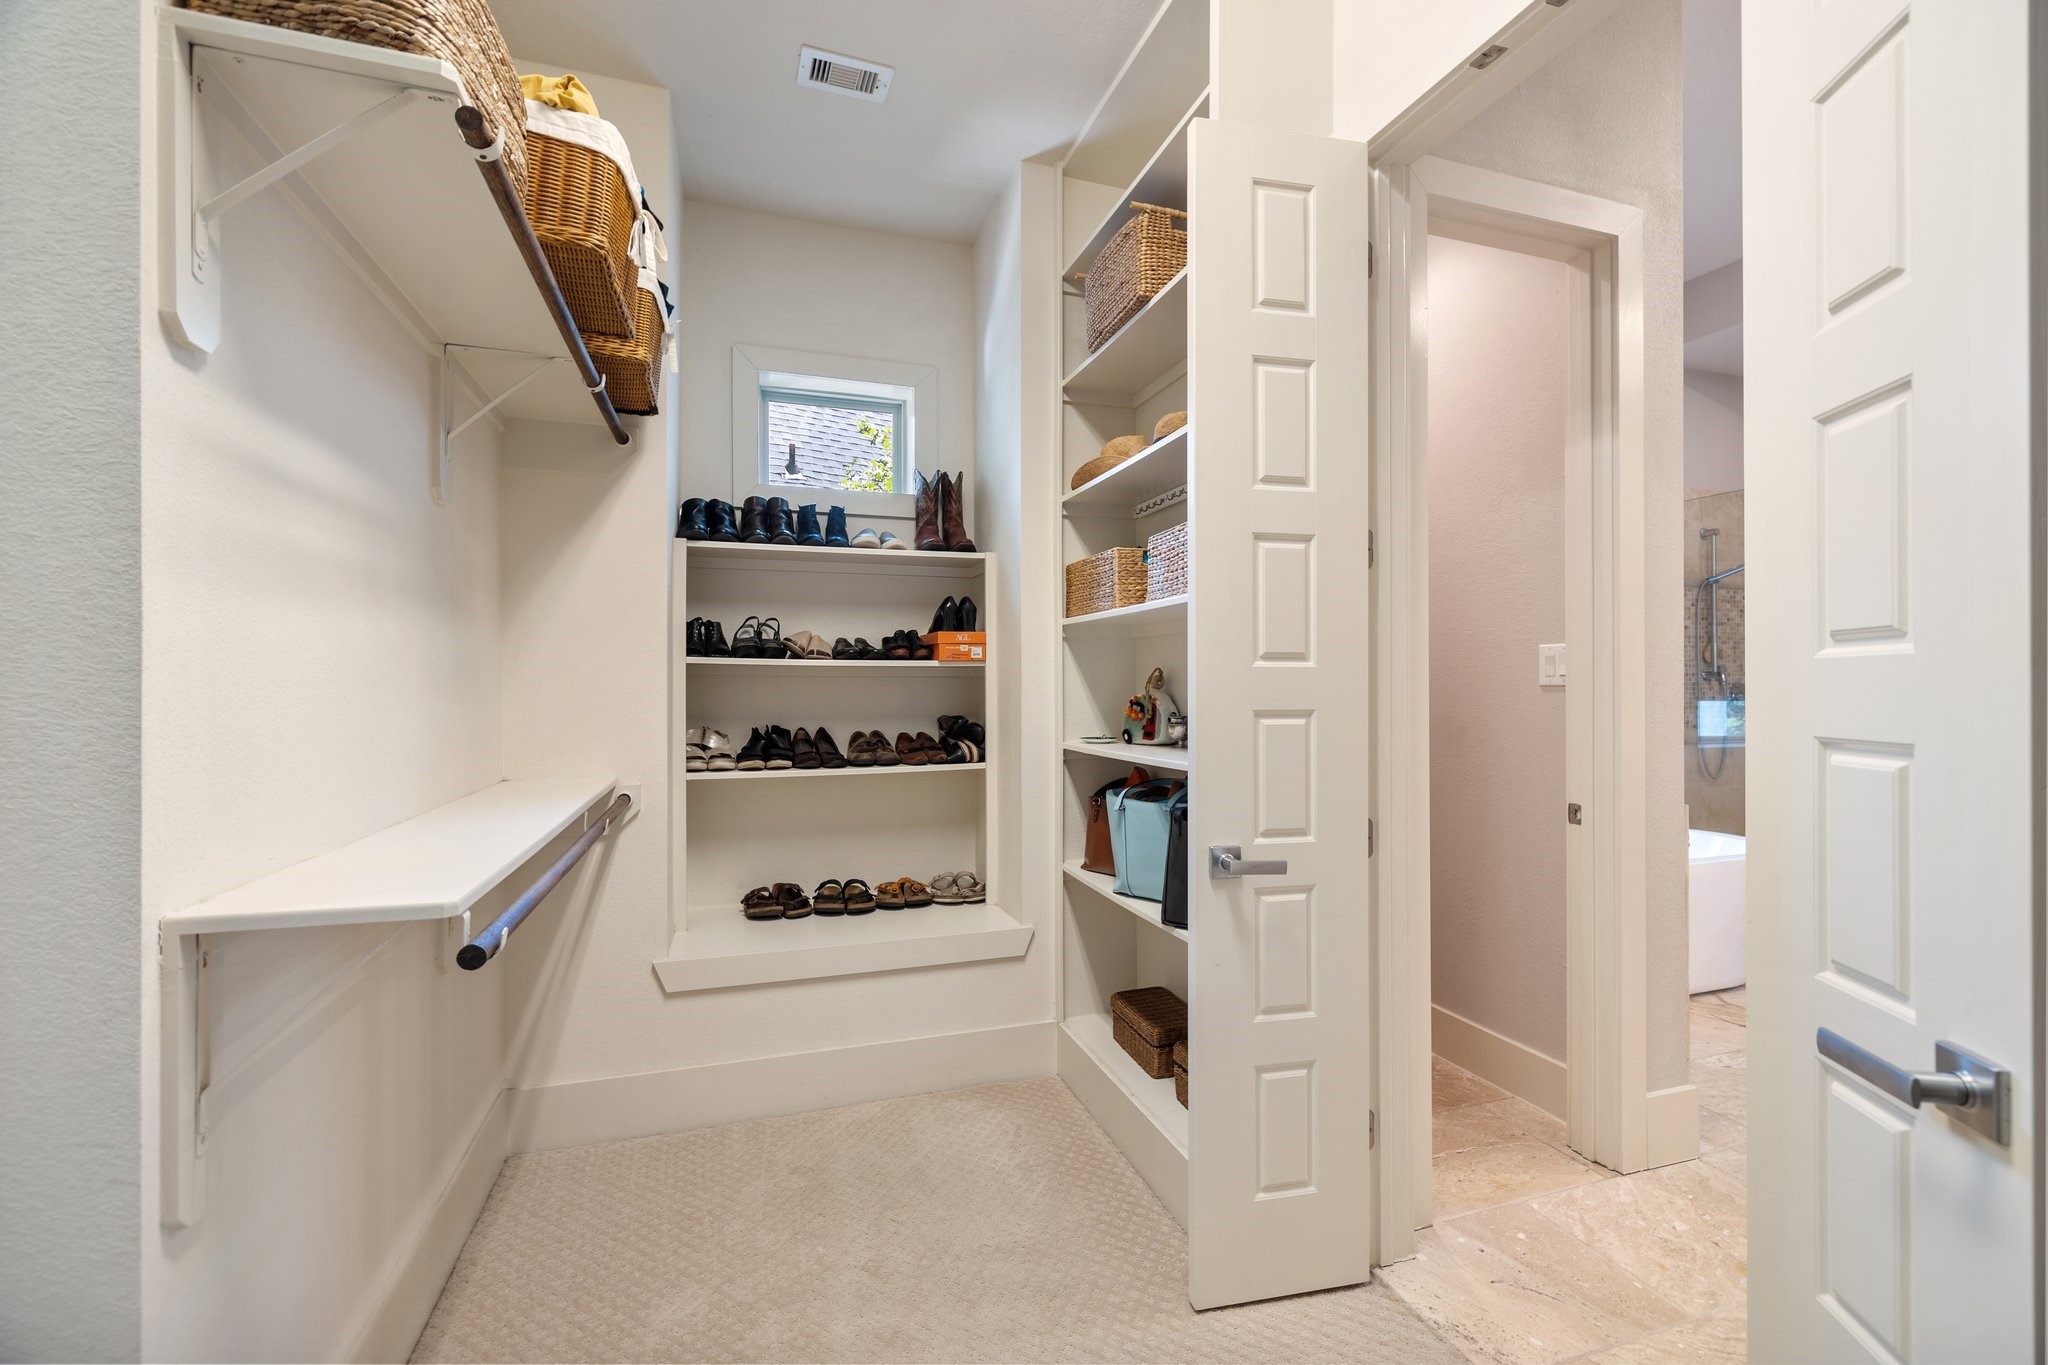 Expansive walk in closet for the primary suite, his/her layout for separation.